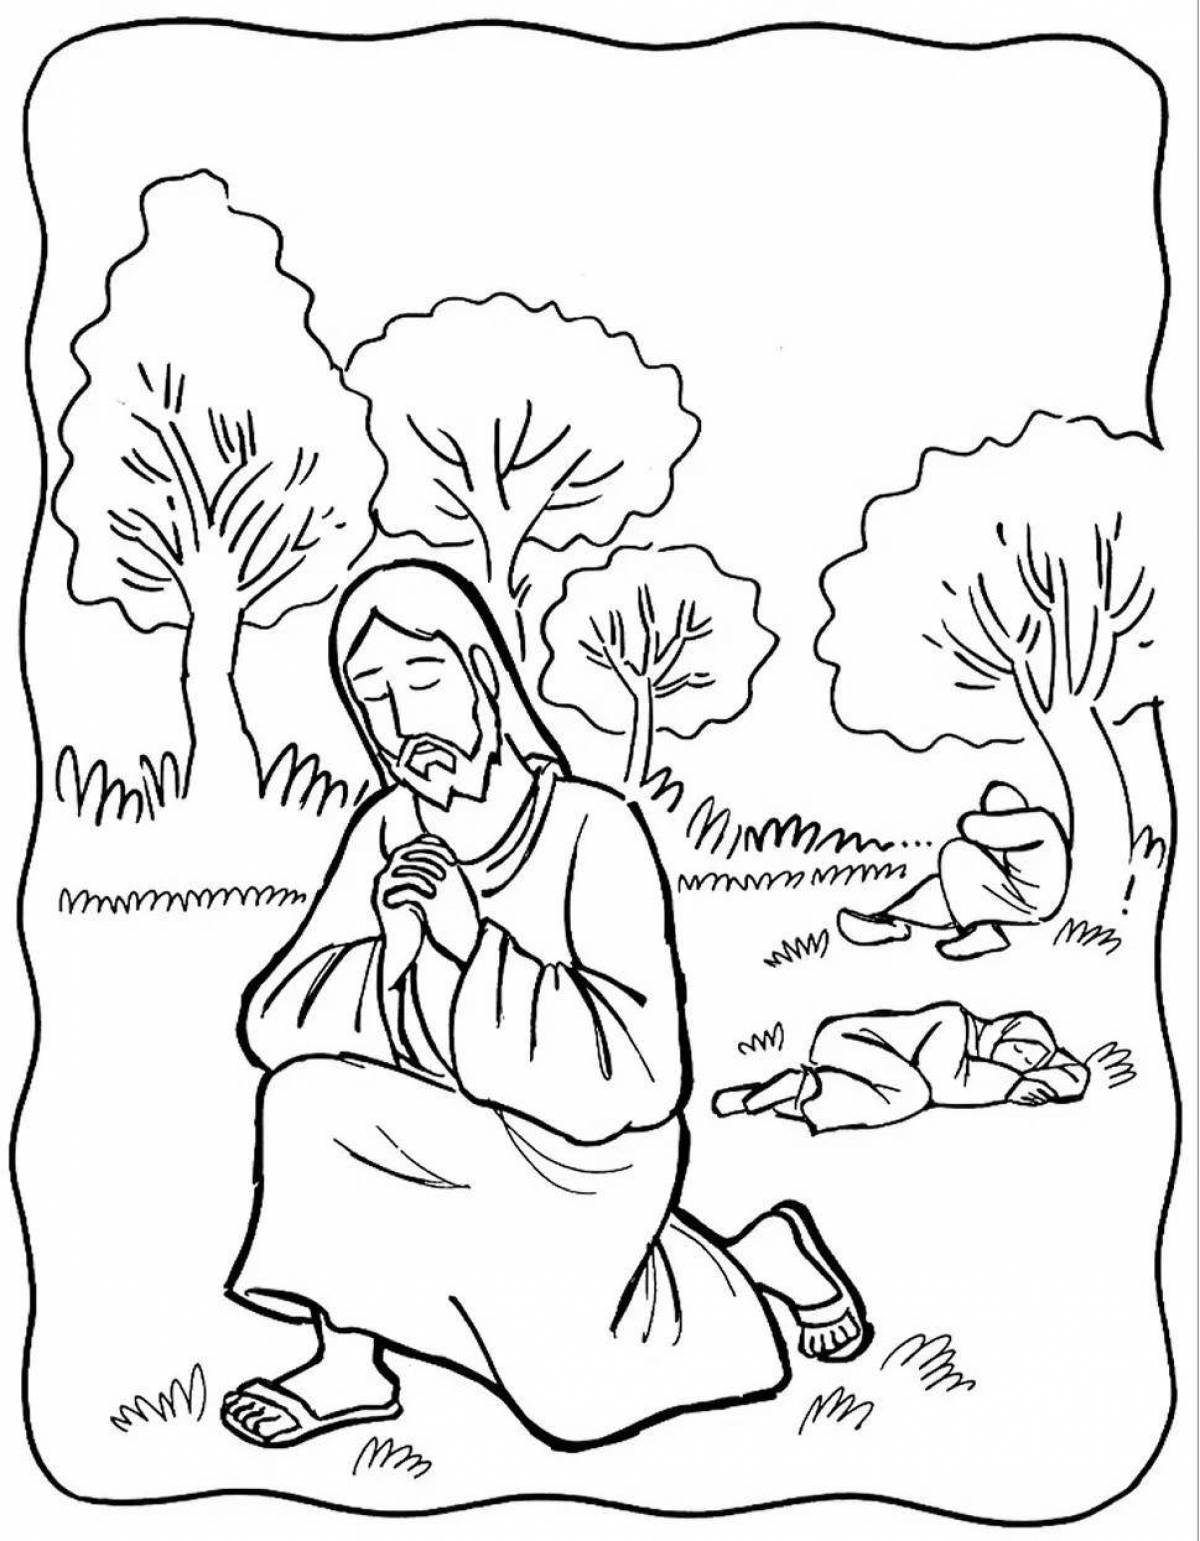 Rough Sunday School Coloring Page